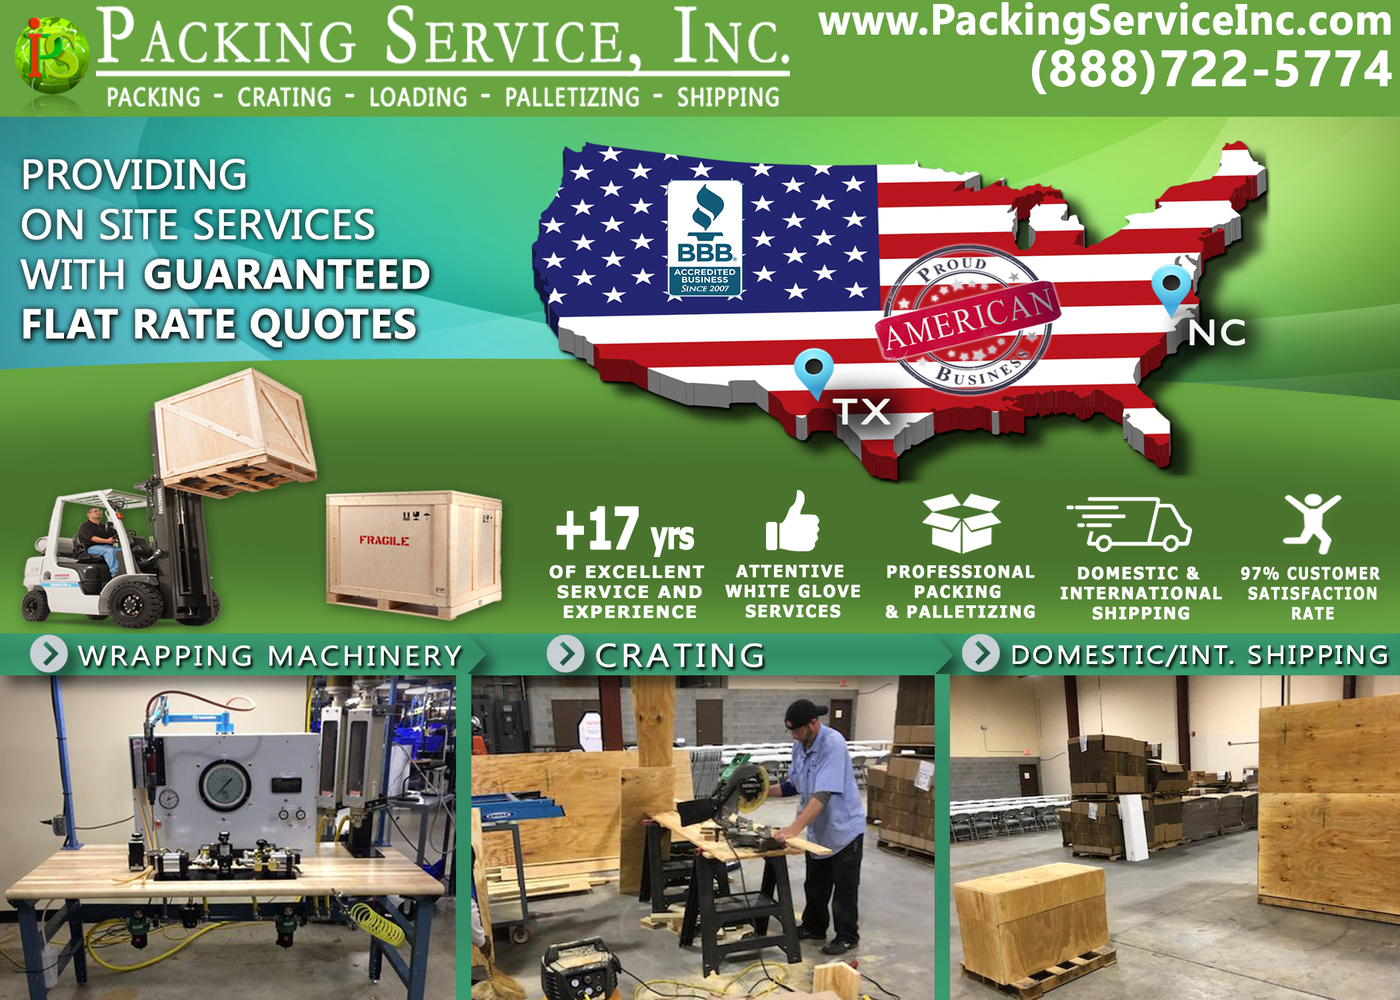 Packing Service Inc.  Established in 2003, the professional company has become the leader in on-site packing and shipping services Nationwide